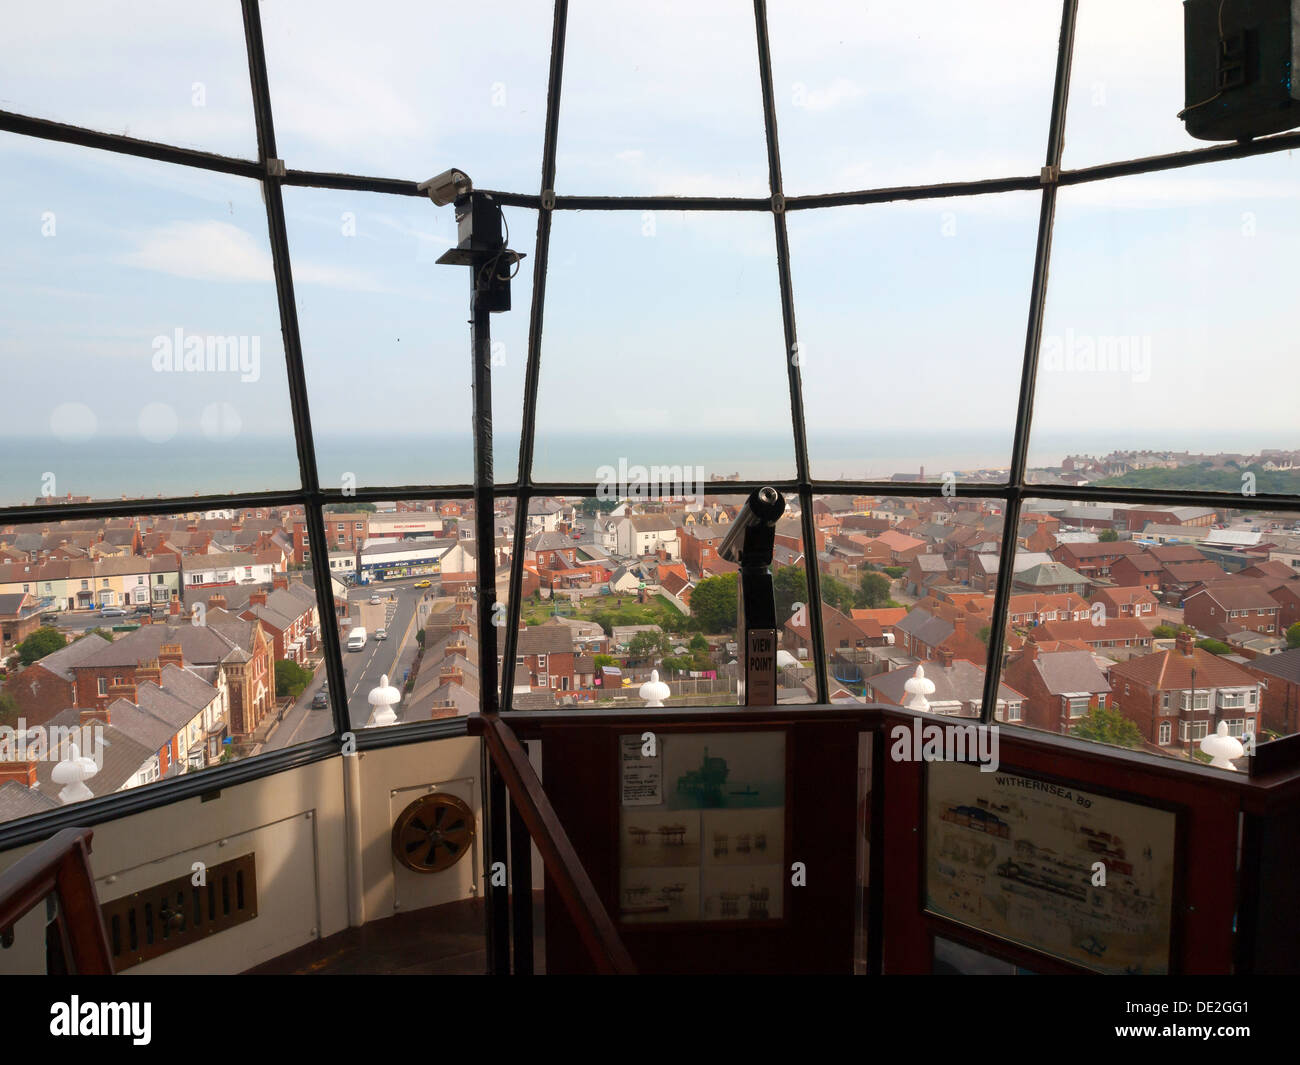 View from the interior of the lighthouse, now a museum, in Withernsea East Yorkshire showing the location in the town centre Stock Photo